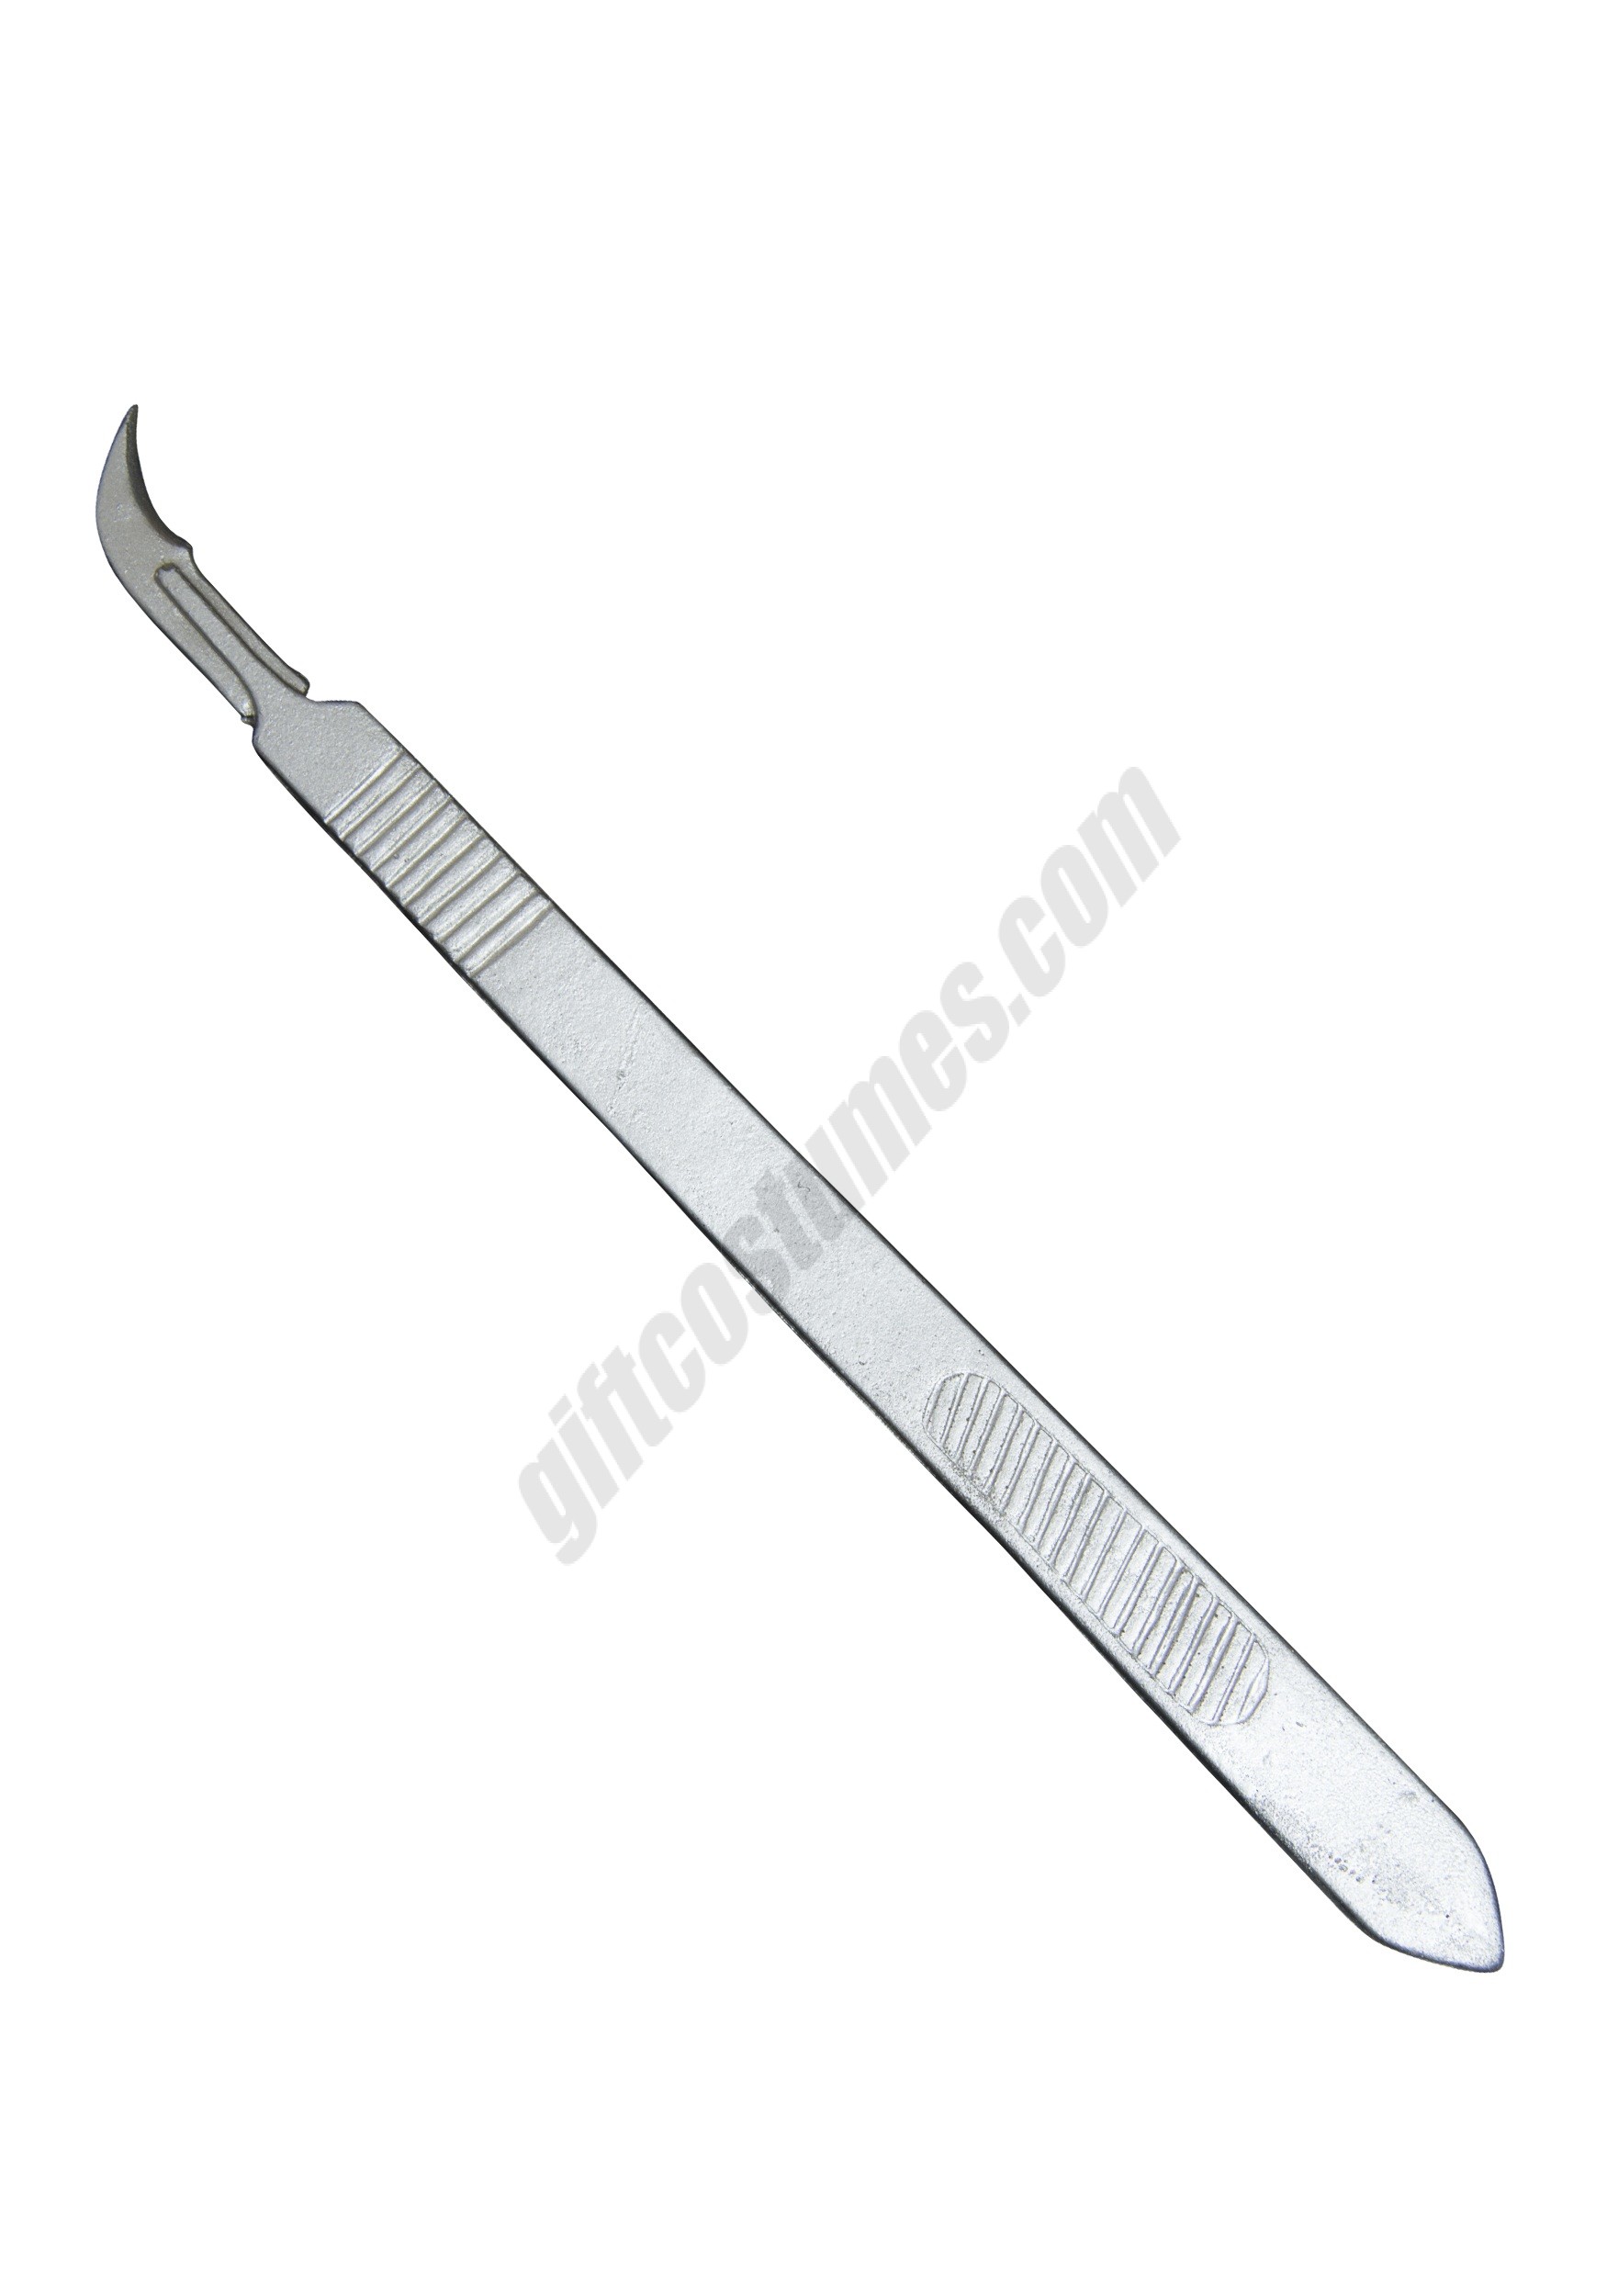 Surgical Scalpel Promotions - Surgical Scalpel Promotions